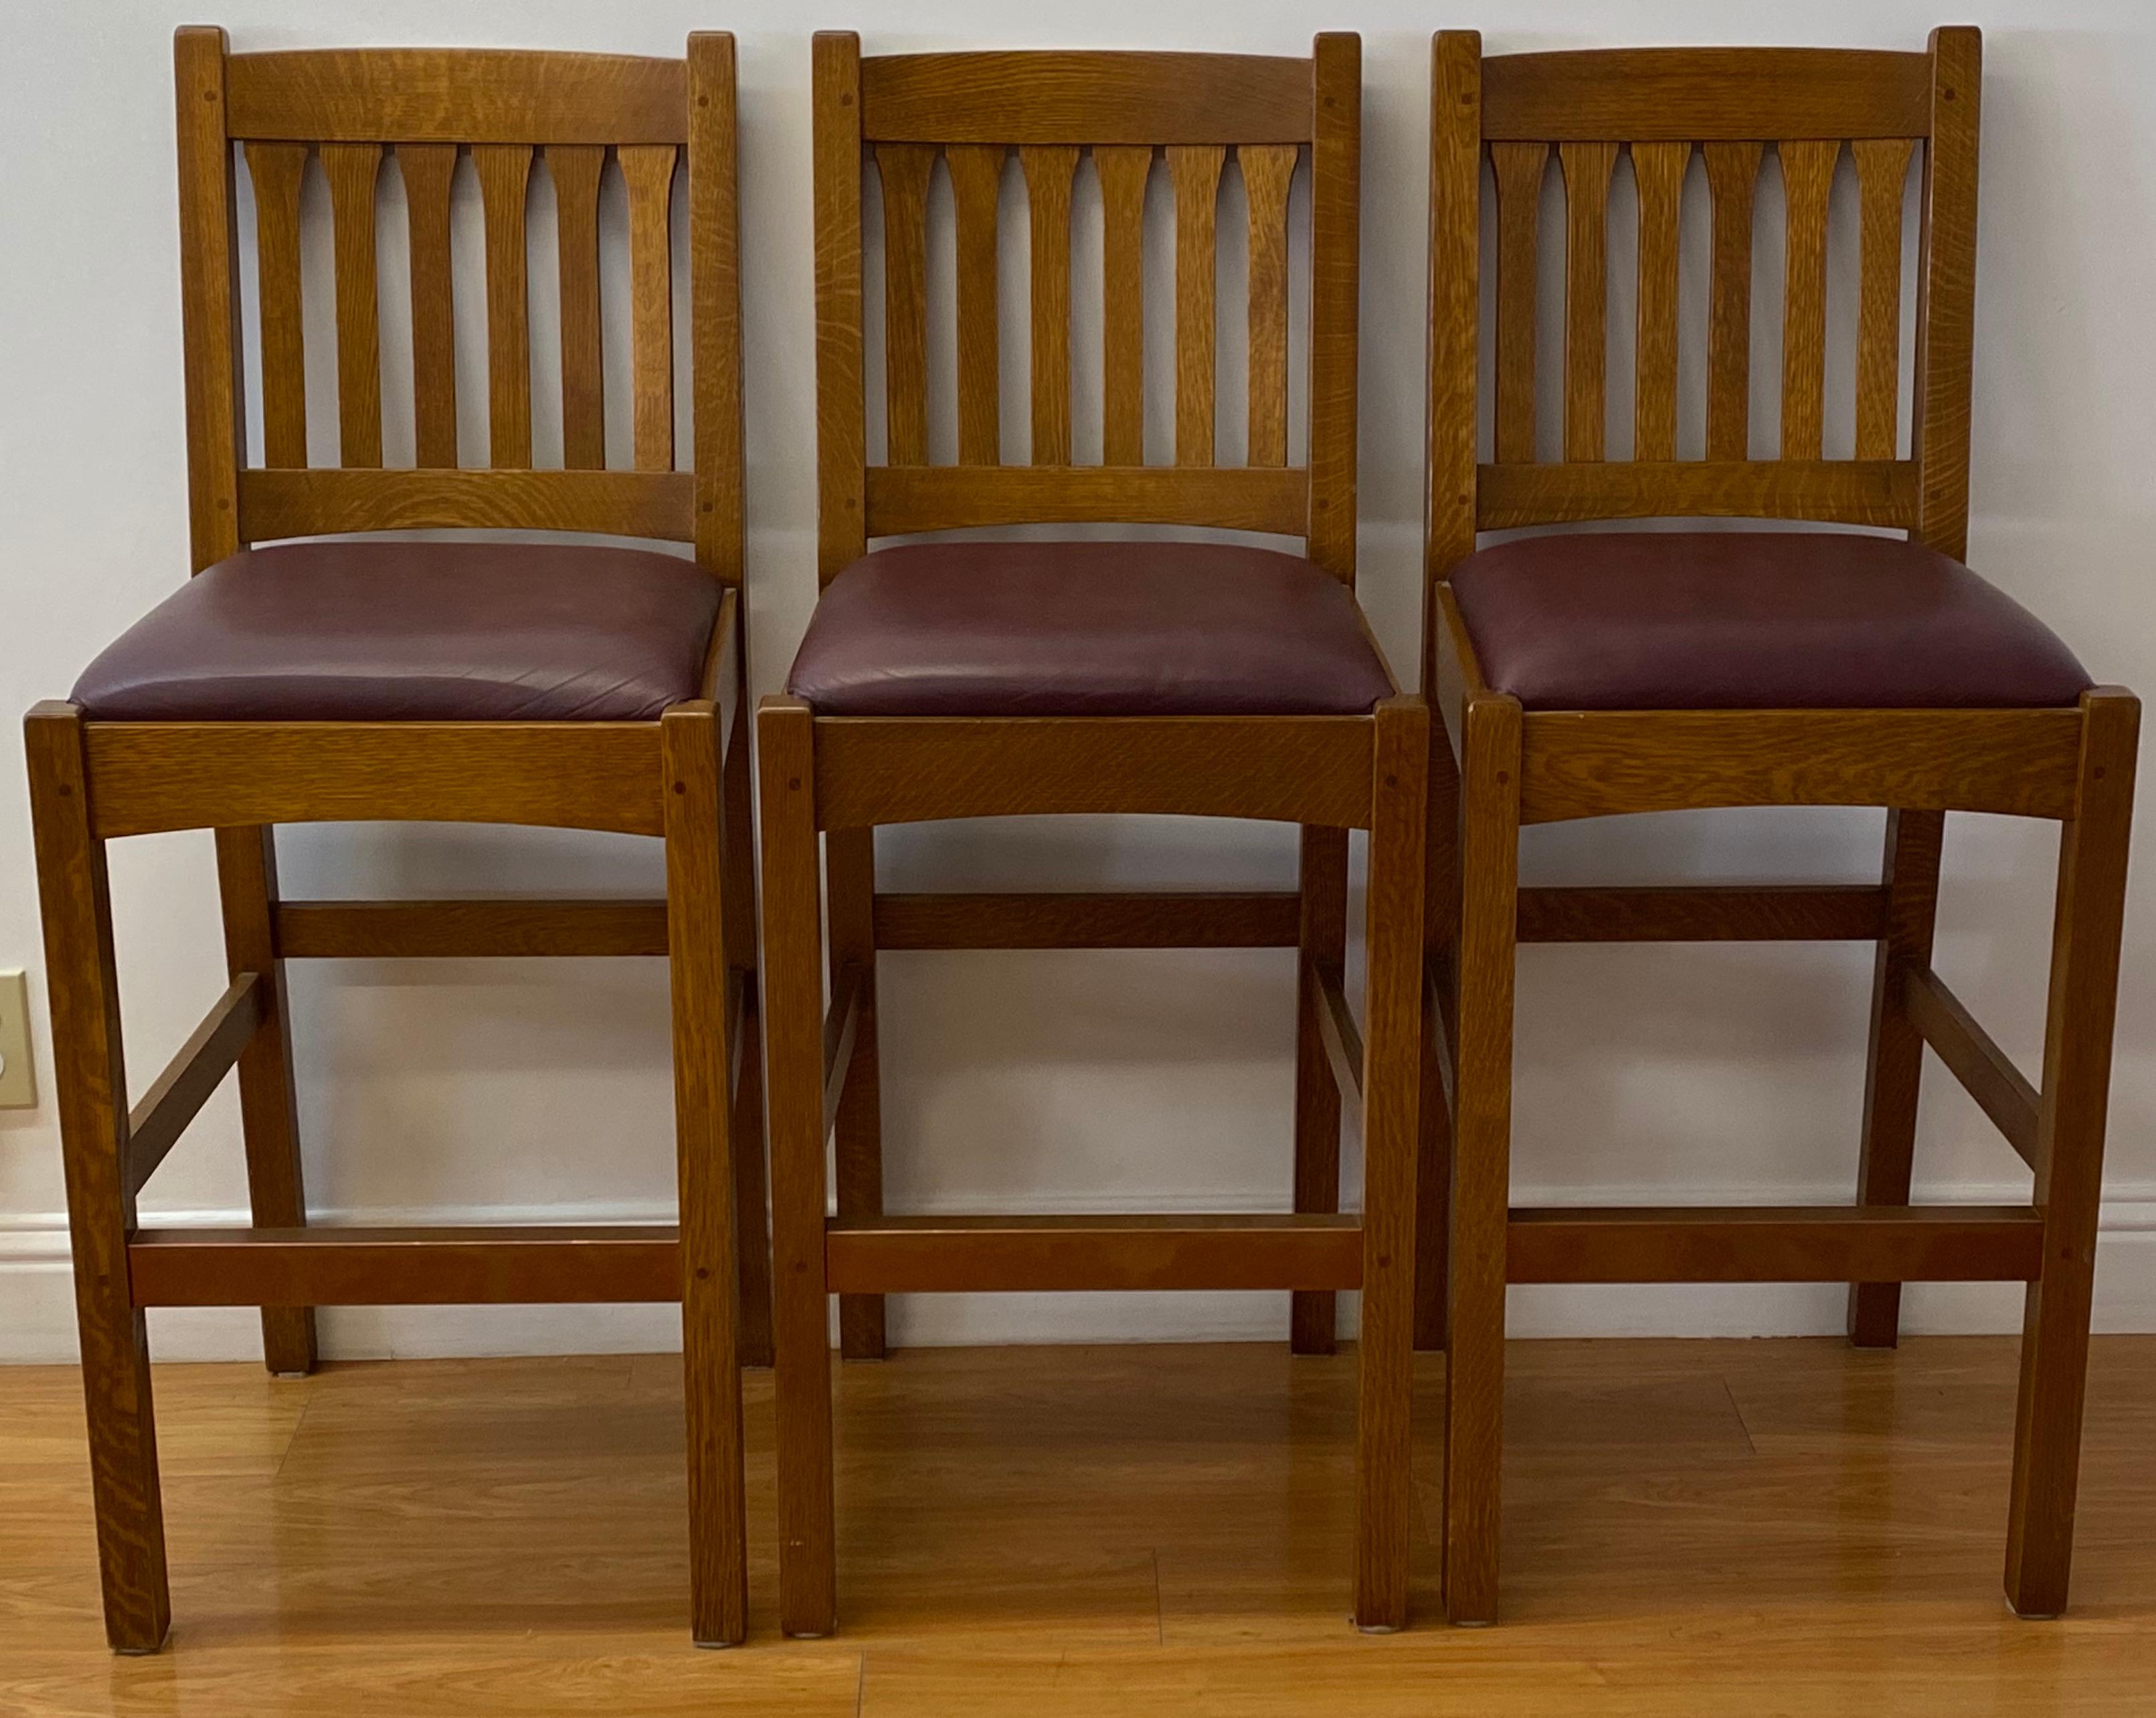 Set of three contemporary mission oak & leather Stickley bar stools

Classic Arts & Crafts mission oak bar stools by Stickley

Measures: 18.5